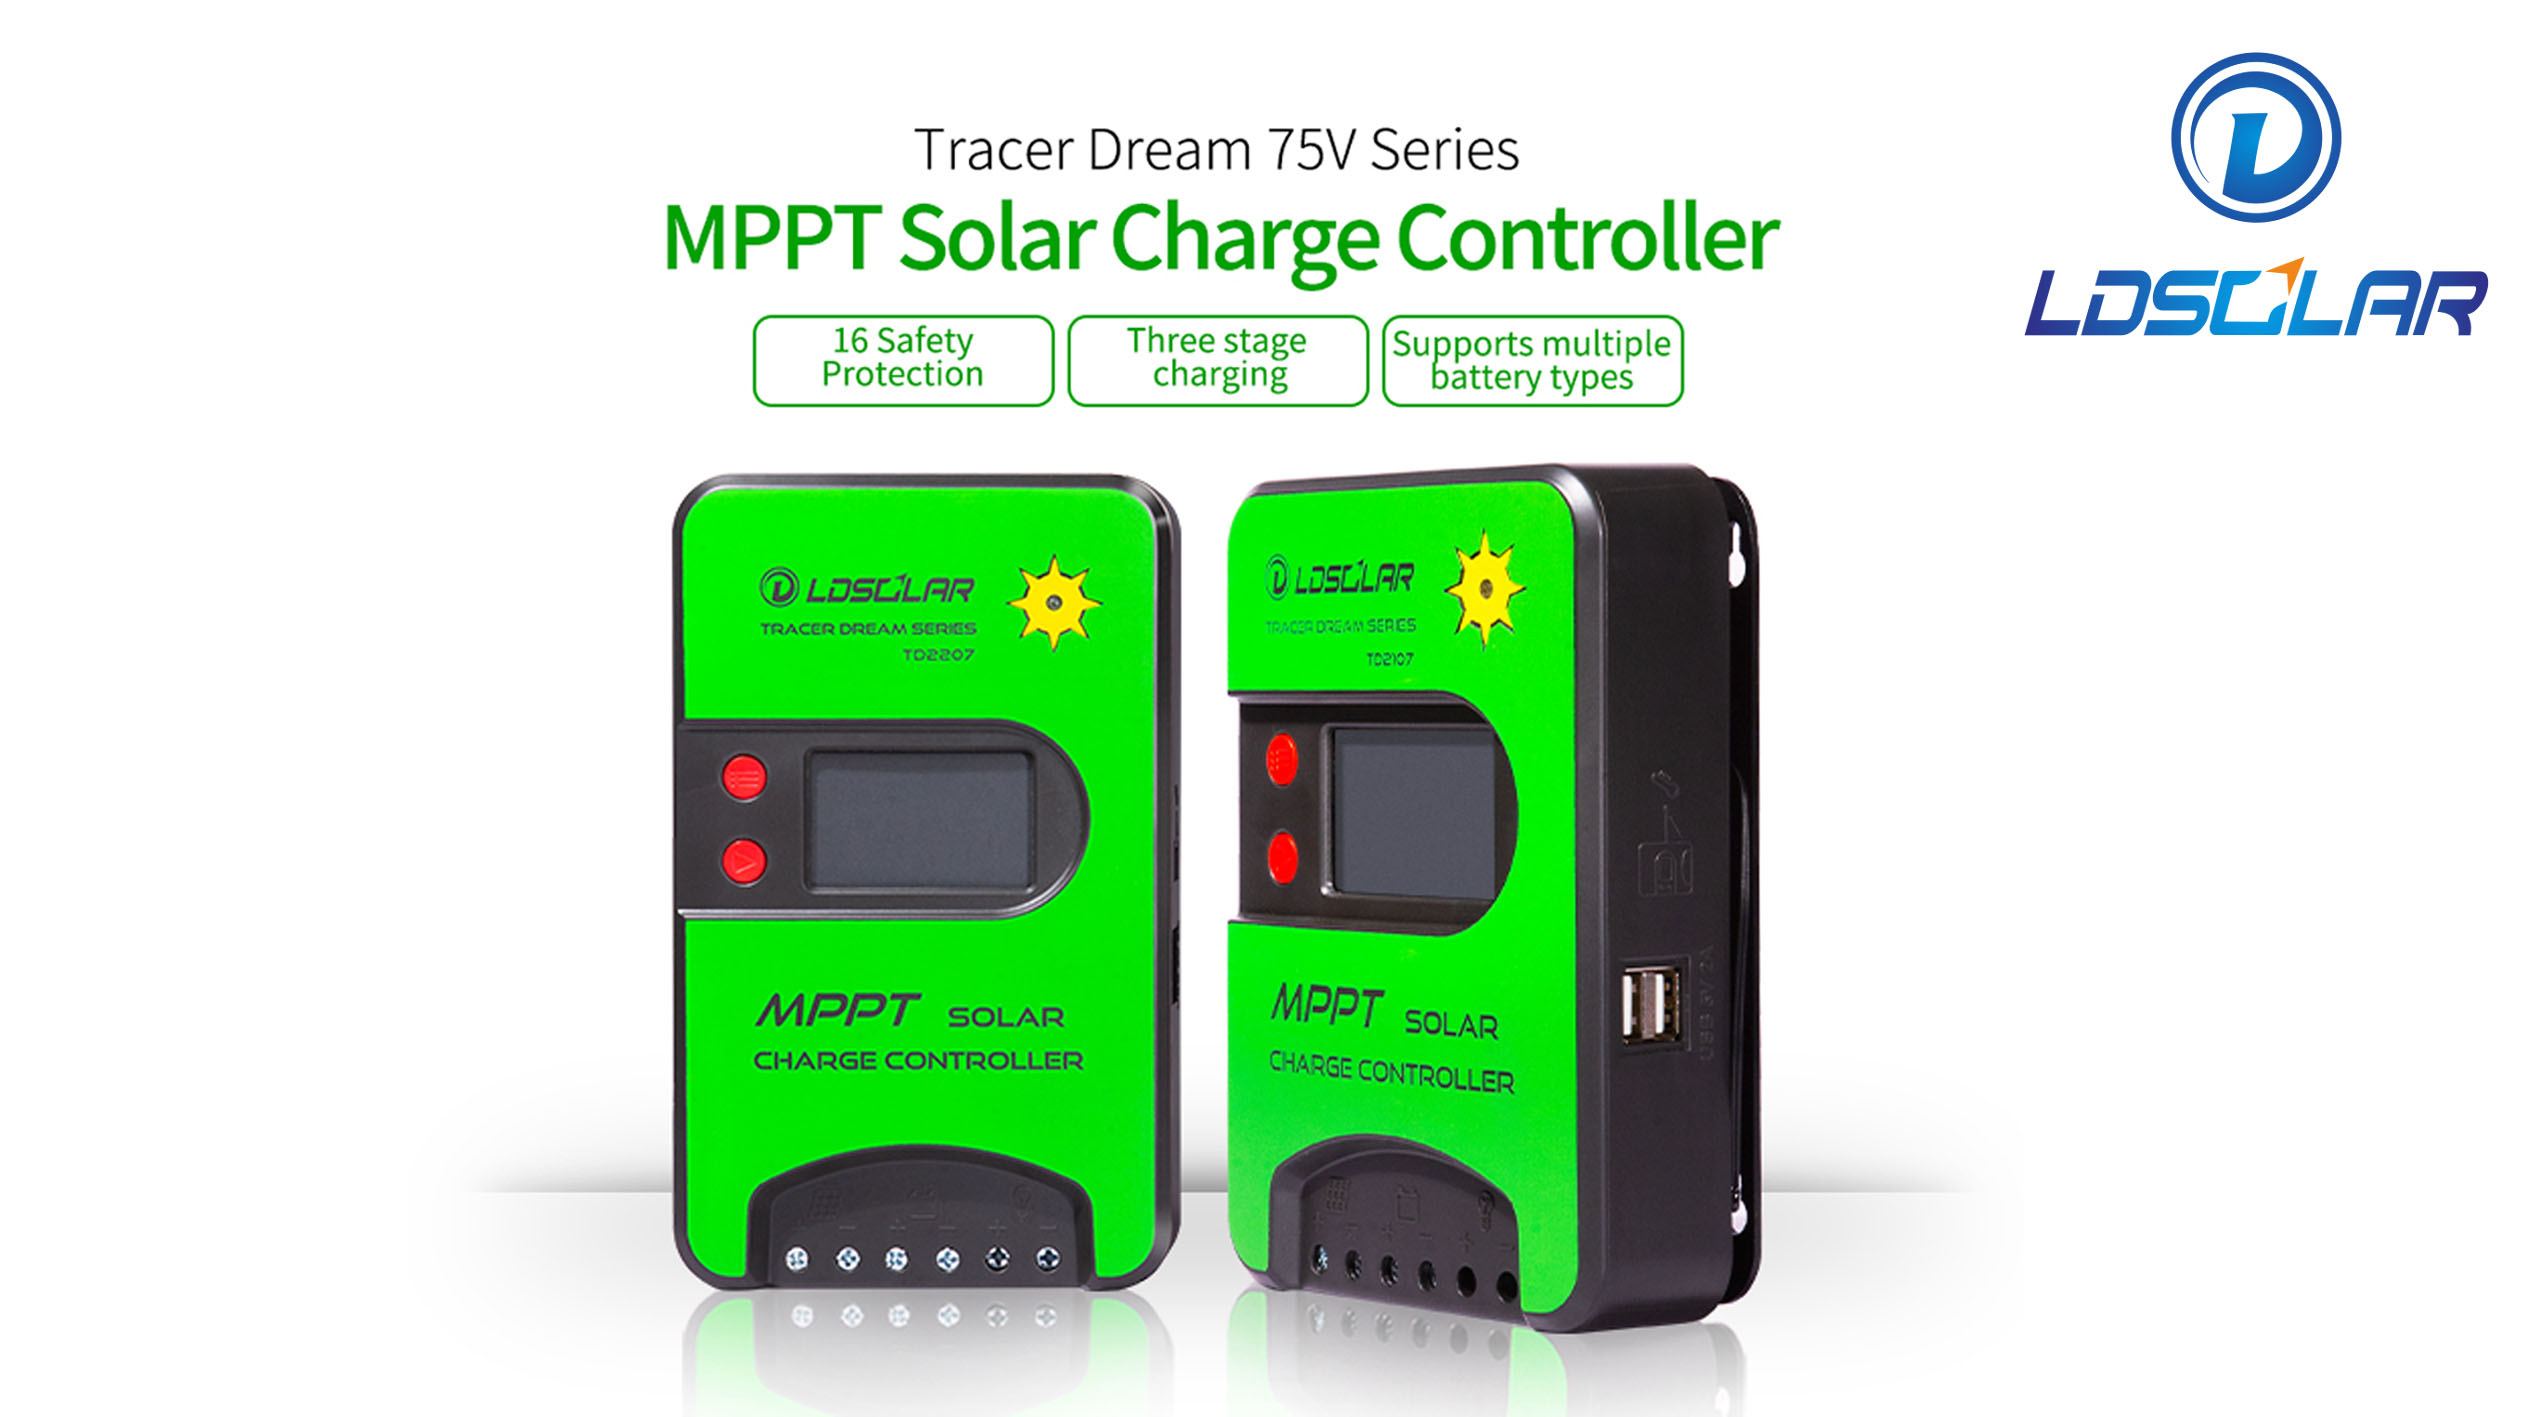 Tracer Dream 75V Series MPPT Solar Charge Controller